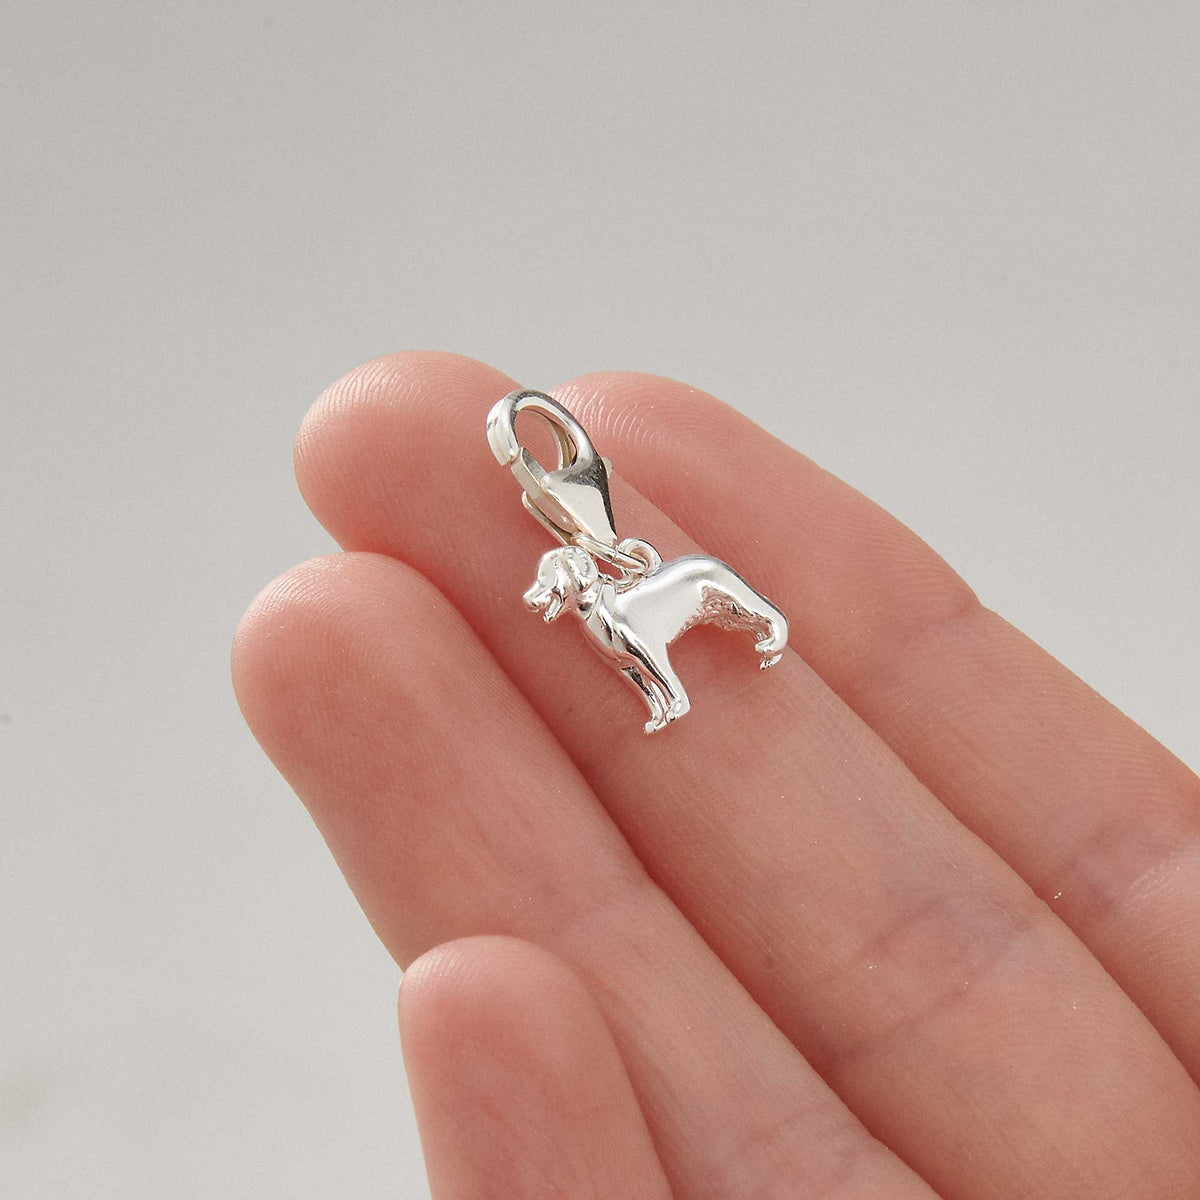 Golden Retriever small silver dog breed solid sterling silver dog charm with clip on clasp Scarlett Jewellery Ltd